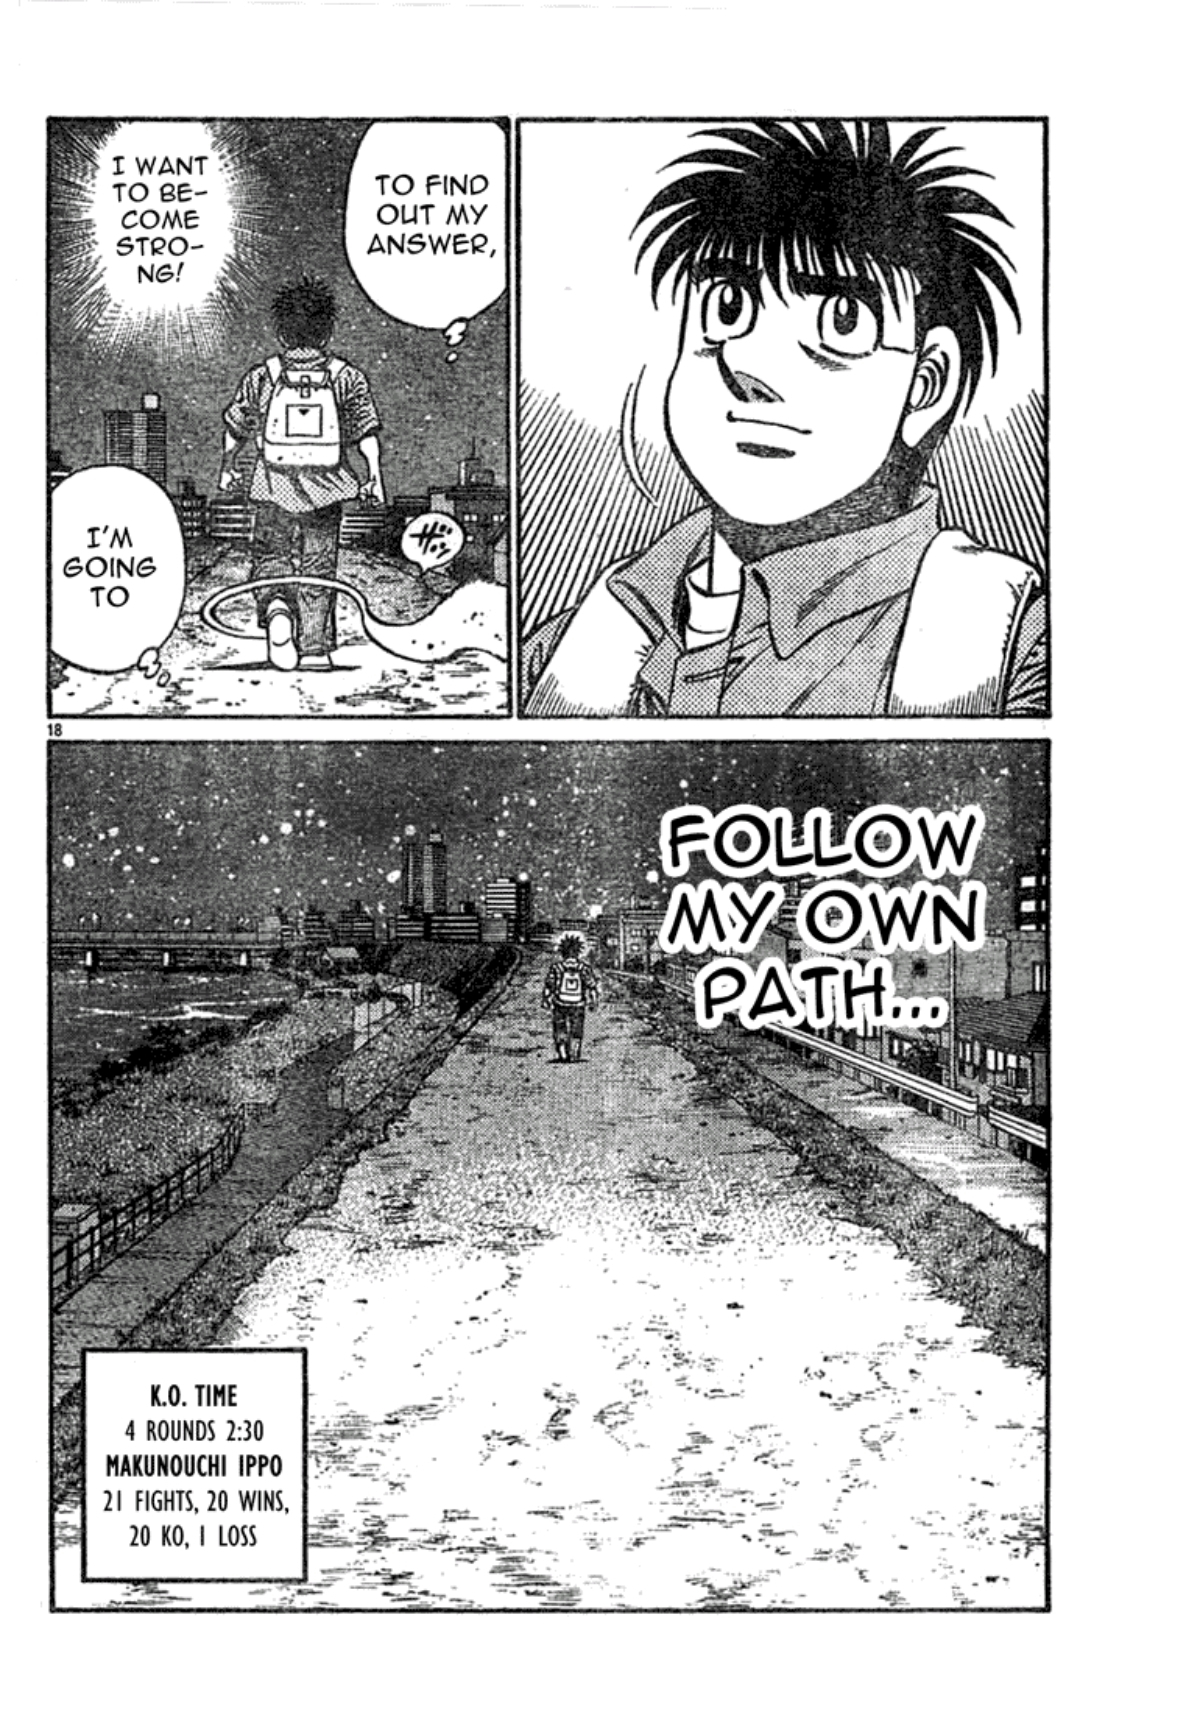 Ippo walks through the snow, declaring that he wants to become strong, and will follow his own path. Ippo's record is 21 fights, 20 wins, 1 loss. 